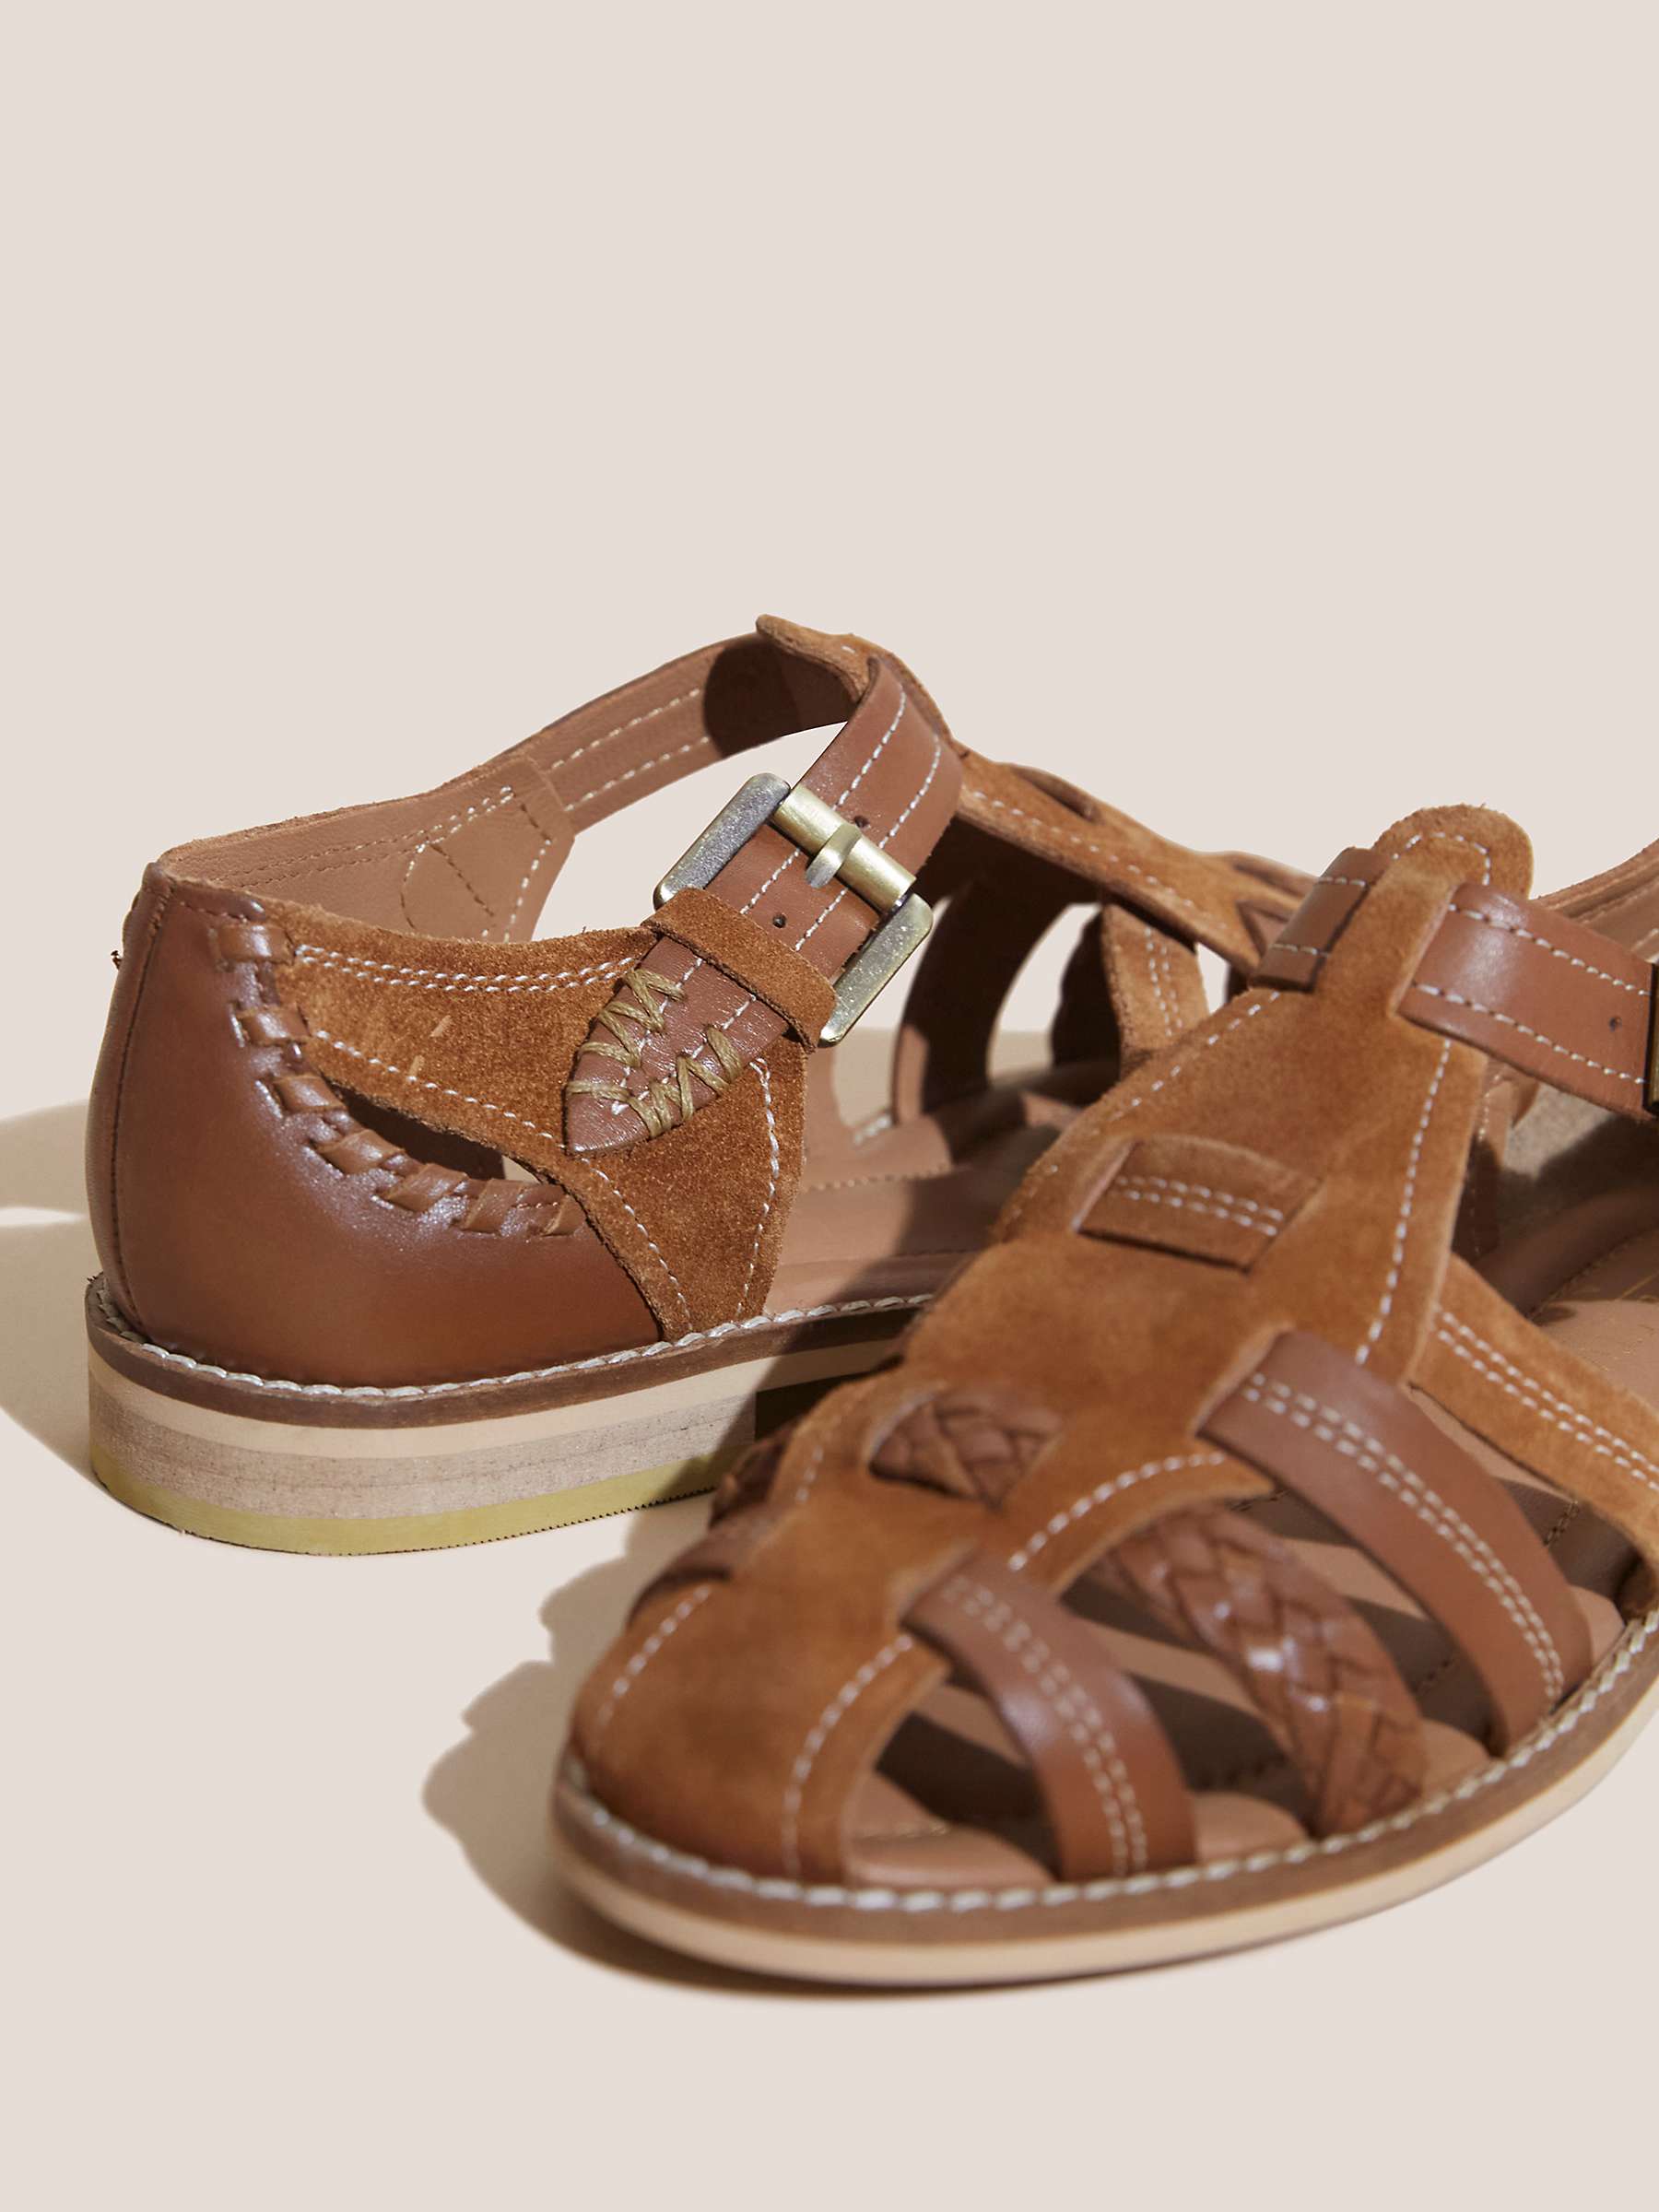 Buy White Stuff Fisherman Leather Sandals Online at johnlewis.com